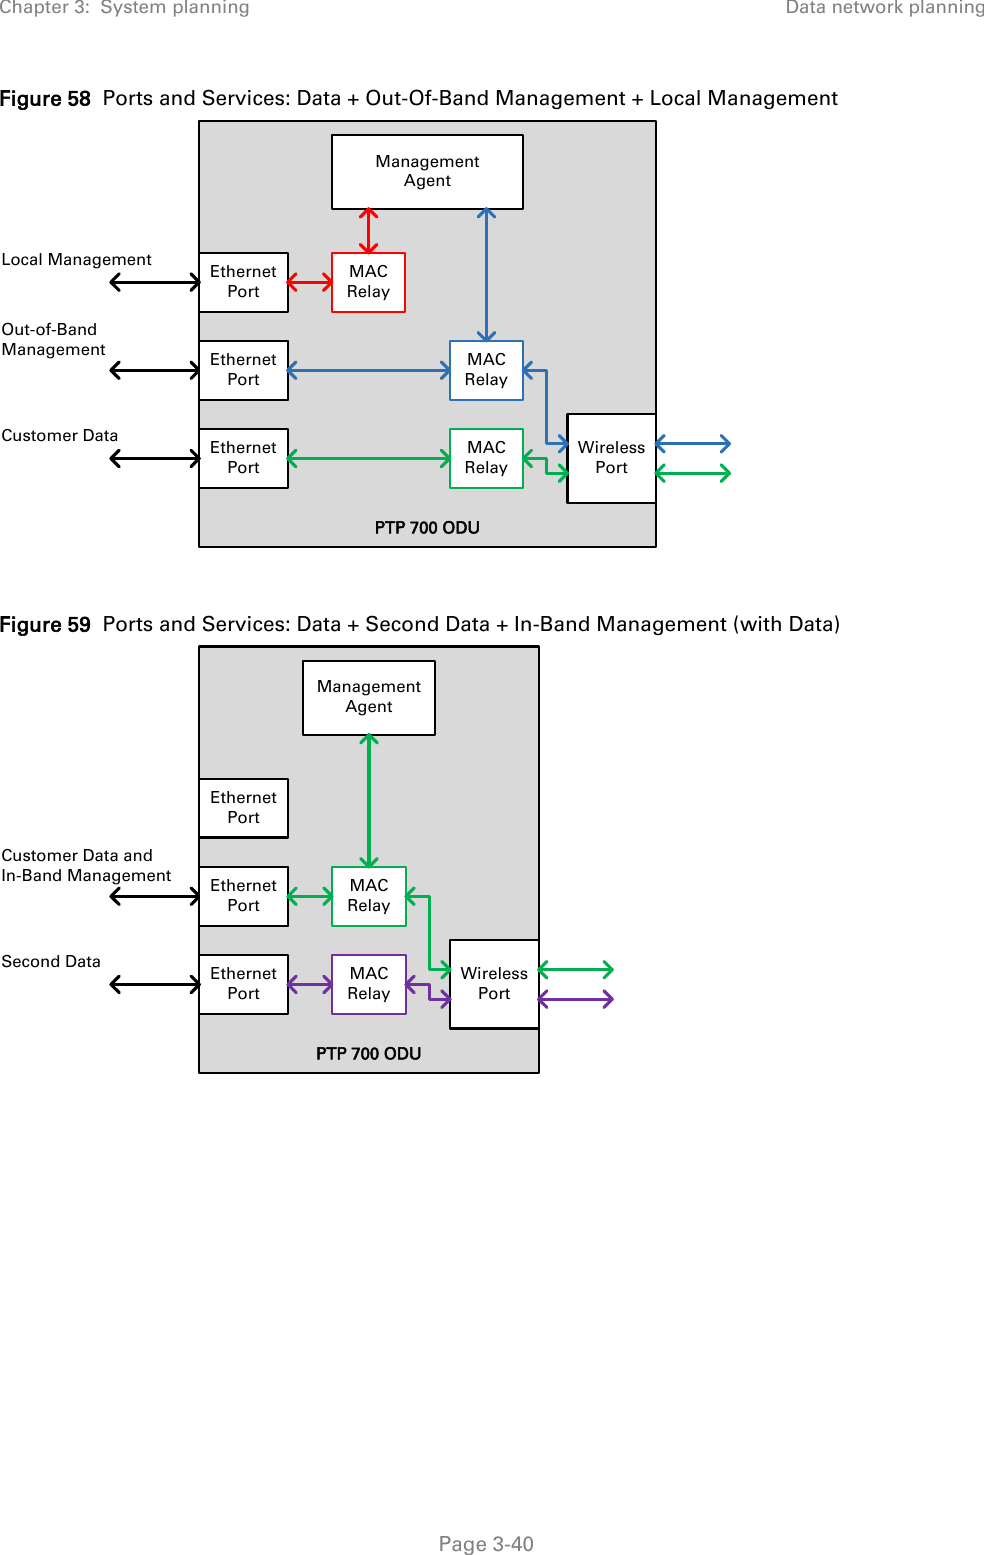 Chapter 3:  System planning Data network planning  Figure 58  Ports and Services: Data + Out-Of-Band Management + Local Management   Figure 59  Ports and Services: Data + Second Data + In-Band Management (with Data)   PTP 700 ODUManagementAgentEthernetPortEthernetPortEthernetPortMAC RelayLocal ManagementMAC RelayCustomer DataEthernetPortMAC RelayOut-of-Band ManagementWirelessPortPTP 700 ODUManagementAgentEthernetPortEthernetPortEthernetPortMAC RelaySecond DataEthernetPortMAC RelayCustomer Data andIn-Band ManagementWirelessPort Page 3-40 